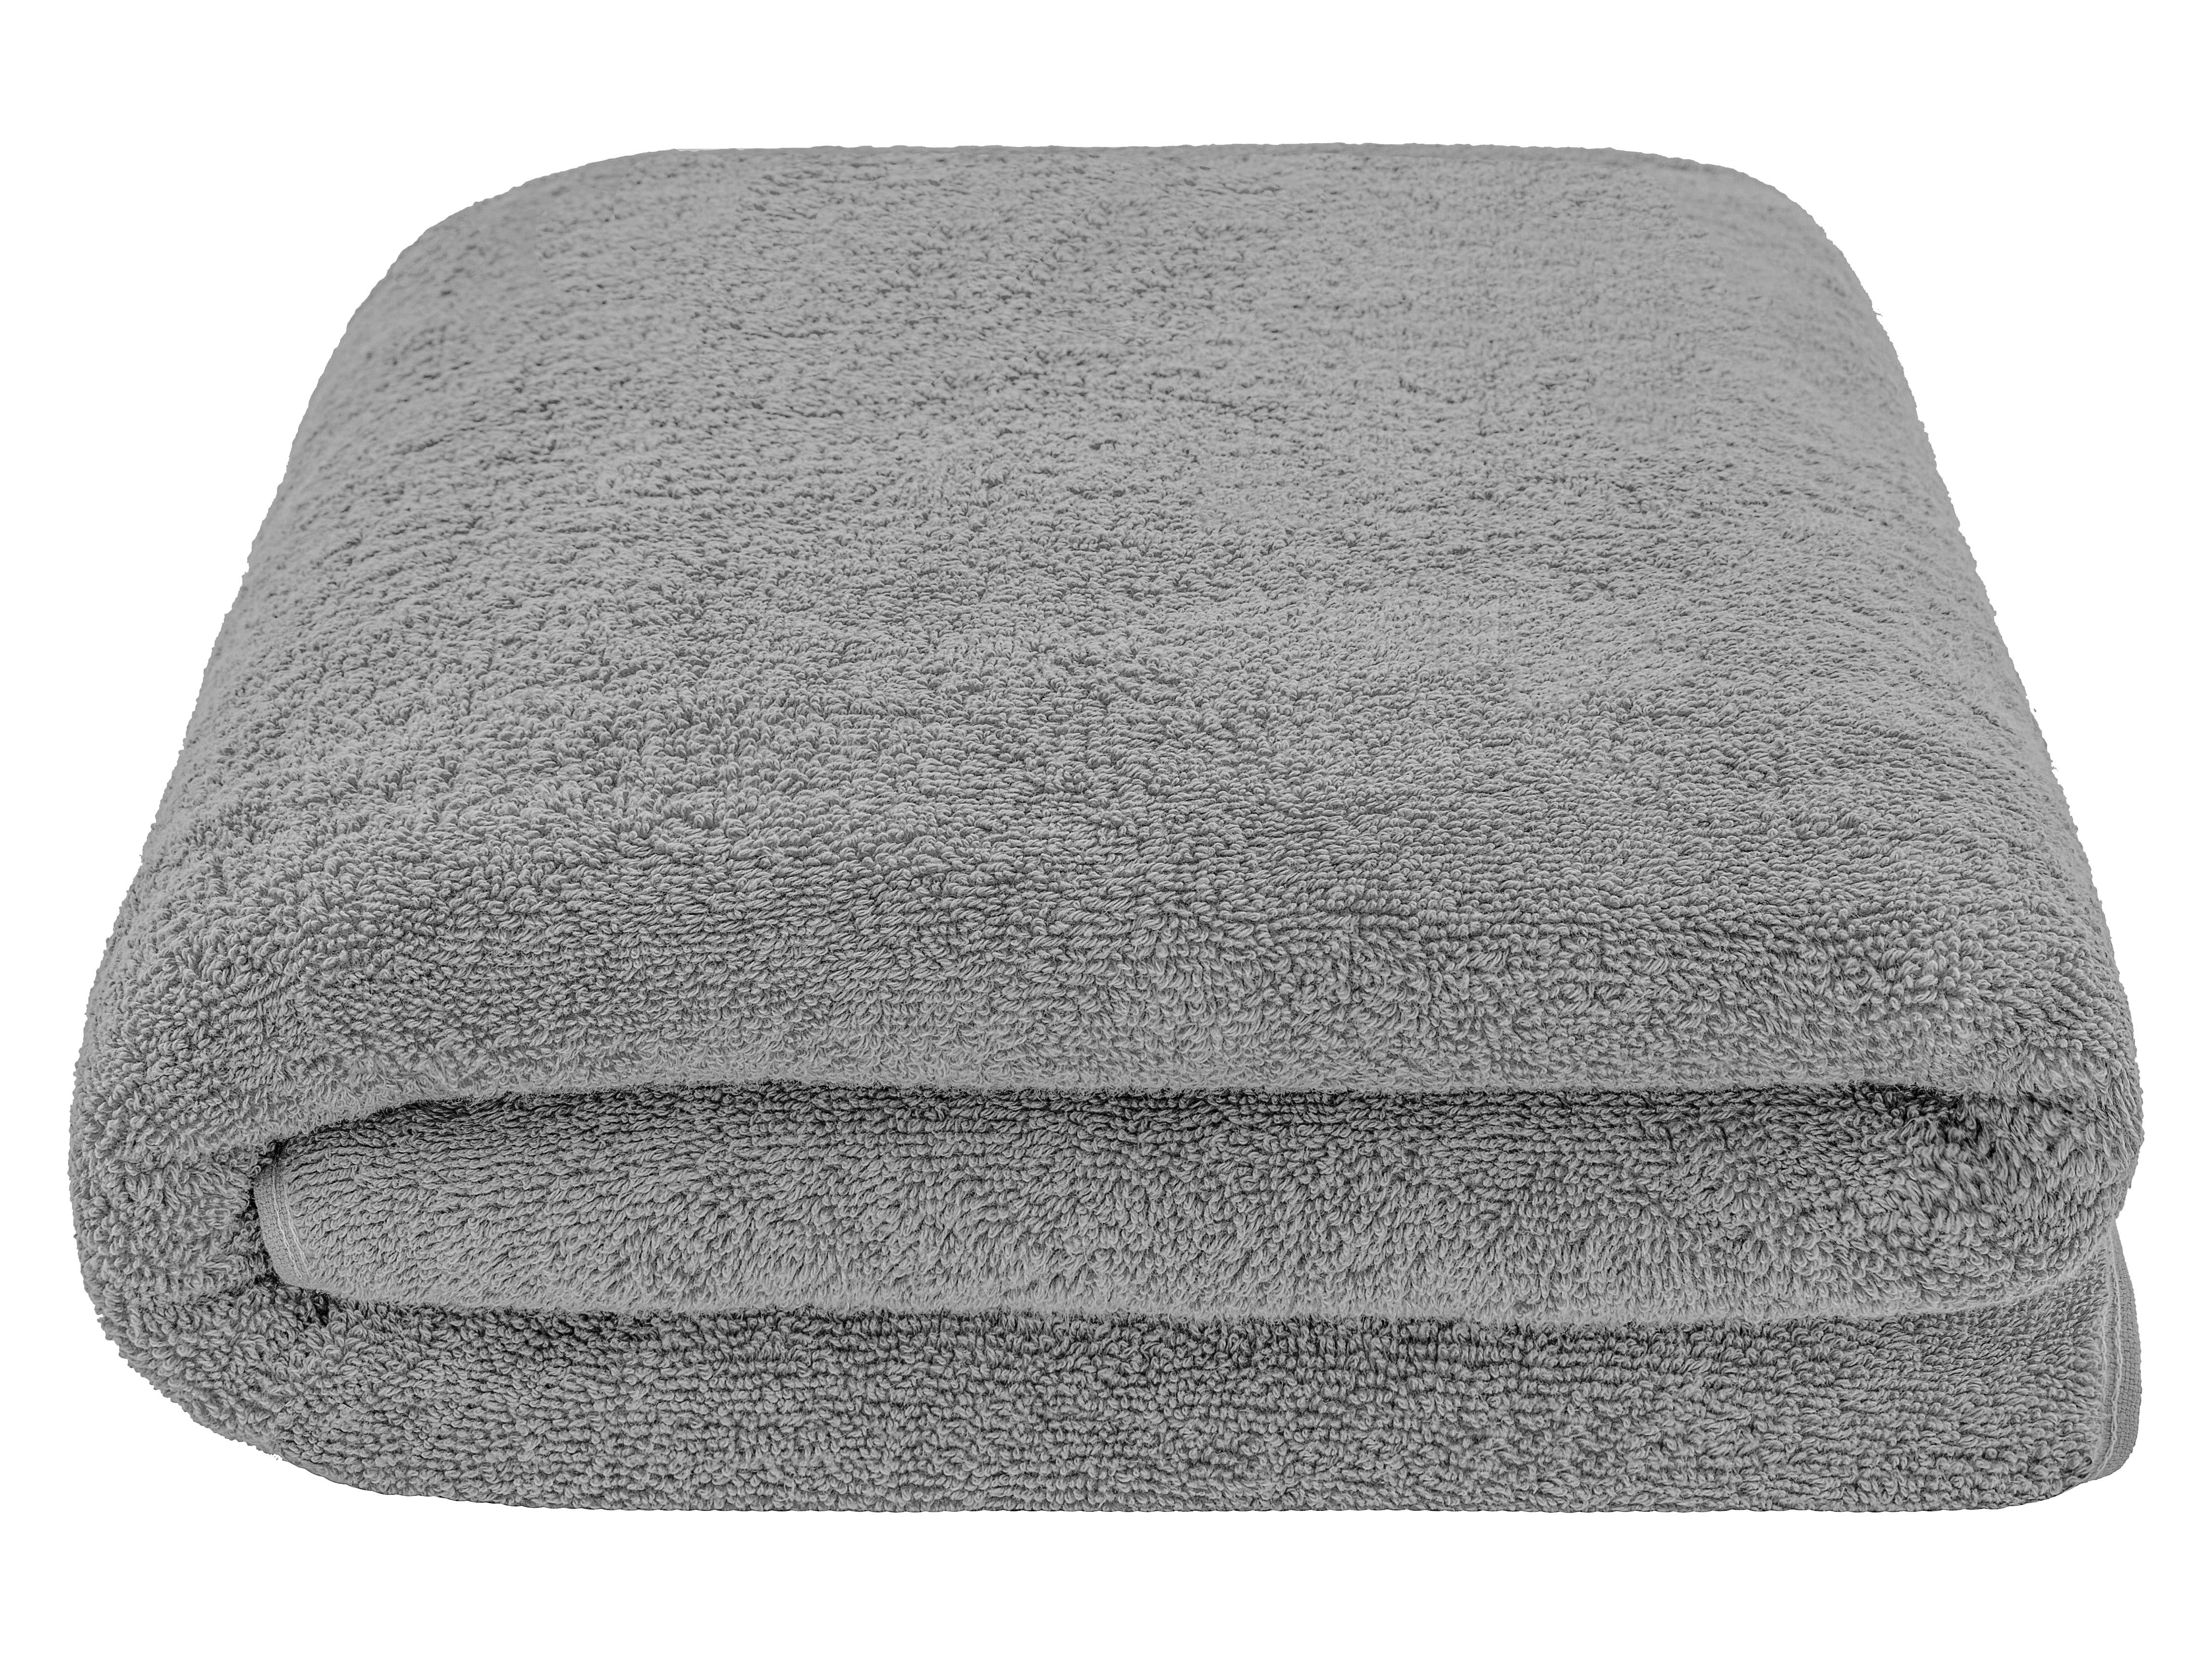 HVMS Oversized Bath Towels Extra Large 40x80 Inches Bath Sheets for Adults  Super Soft Quick Dry Highly Absobent Microfiber Shower Towels (2 Piece